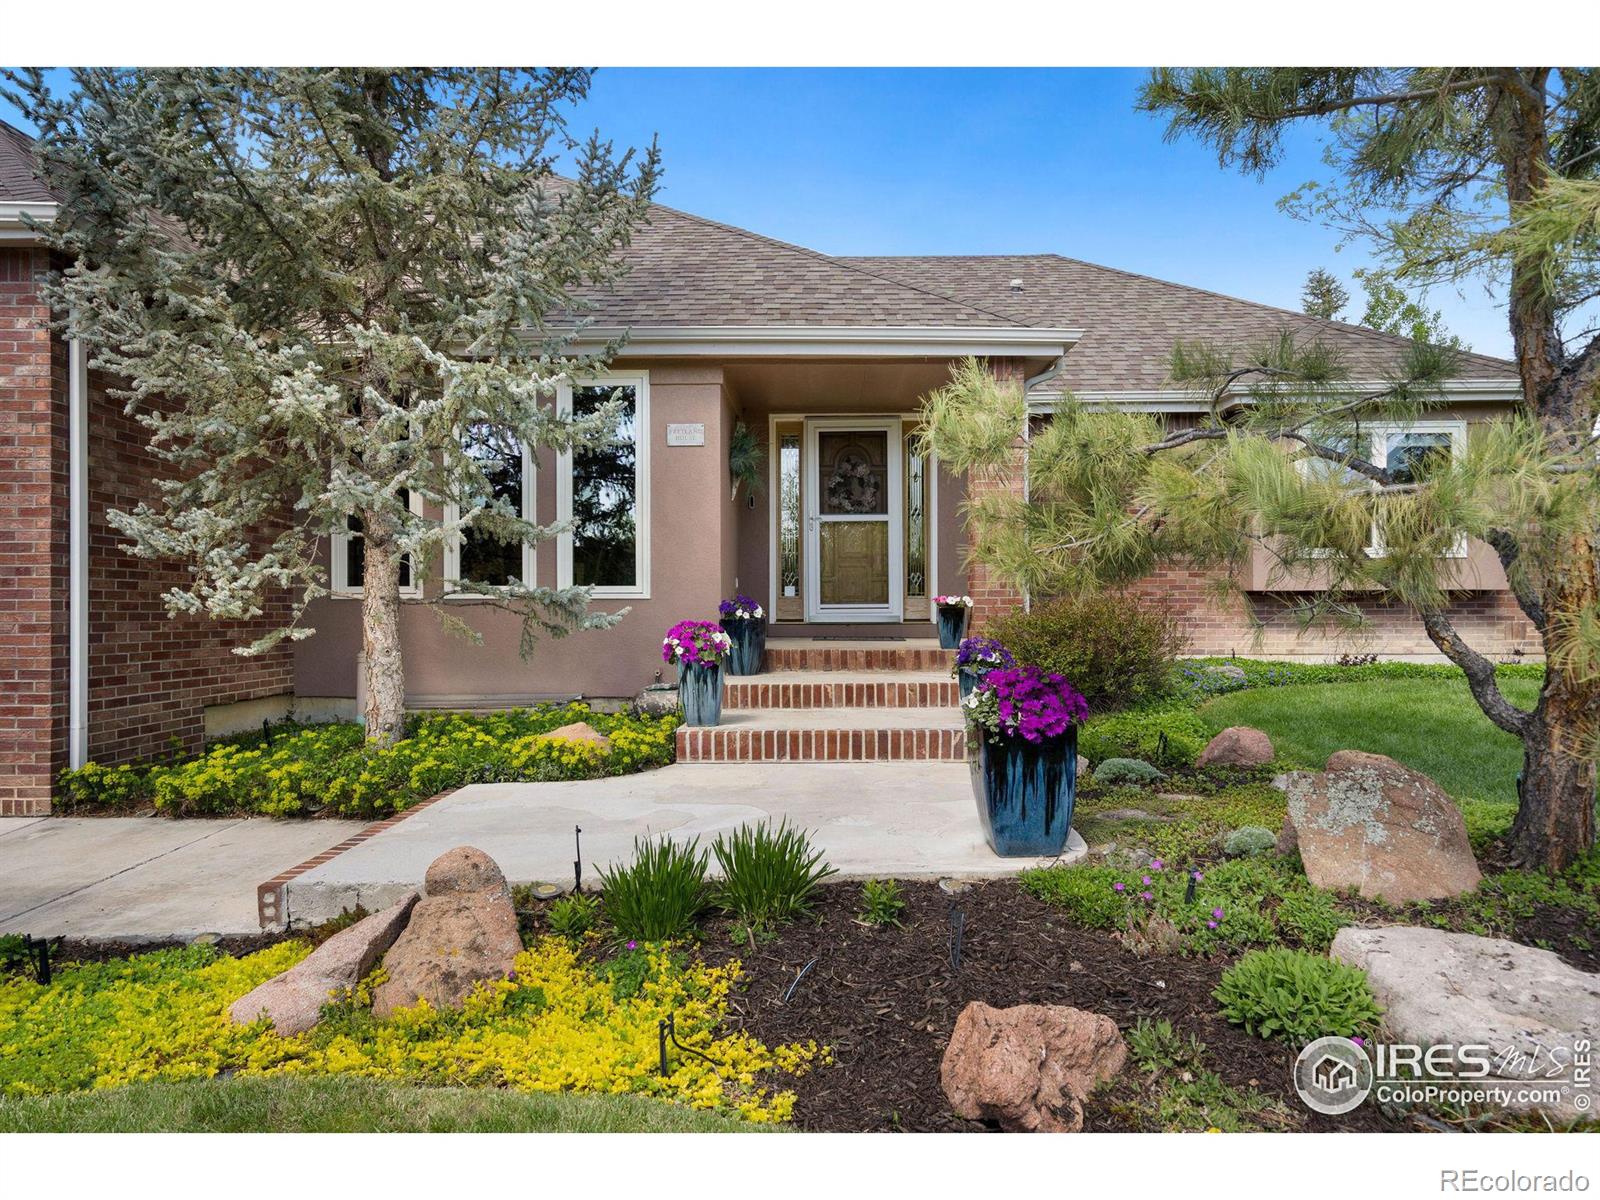 Report Image for 4213  Idledale Drive,Fort Collins, Colorado